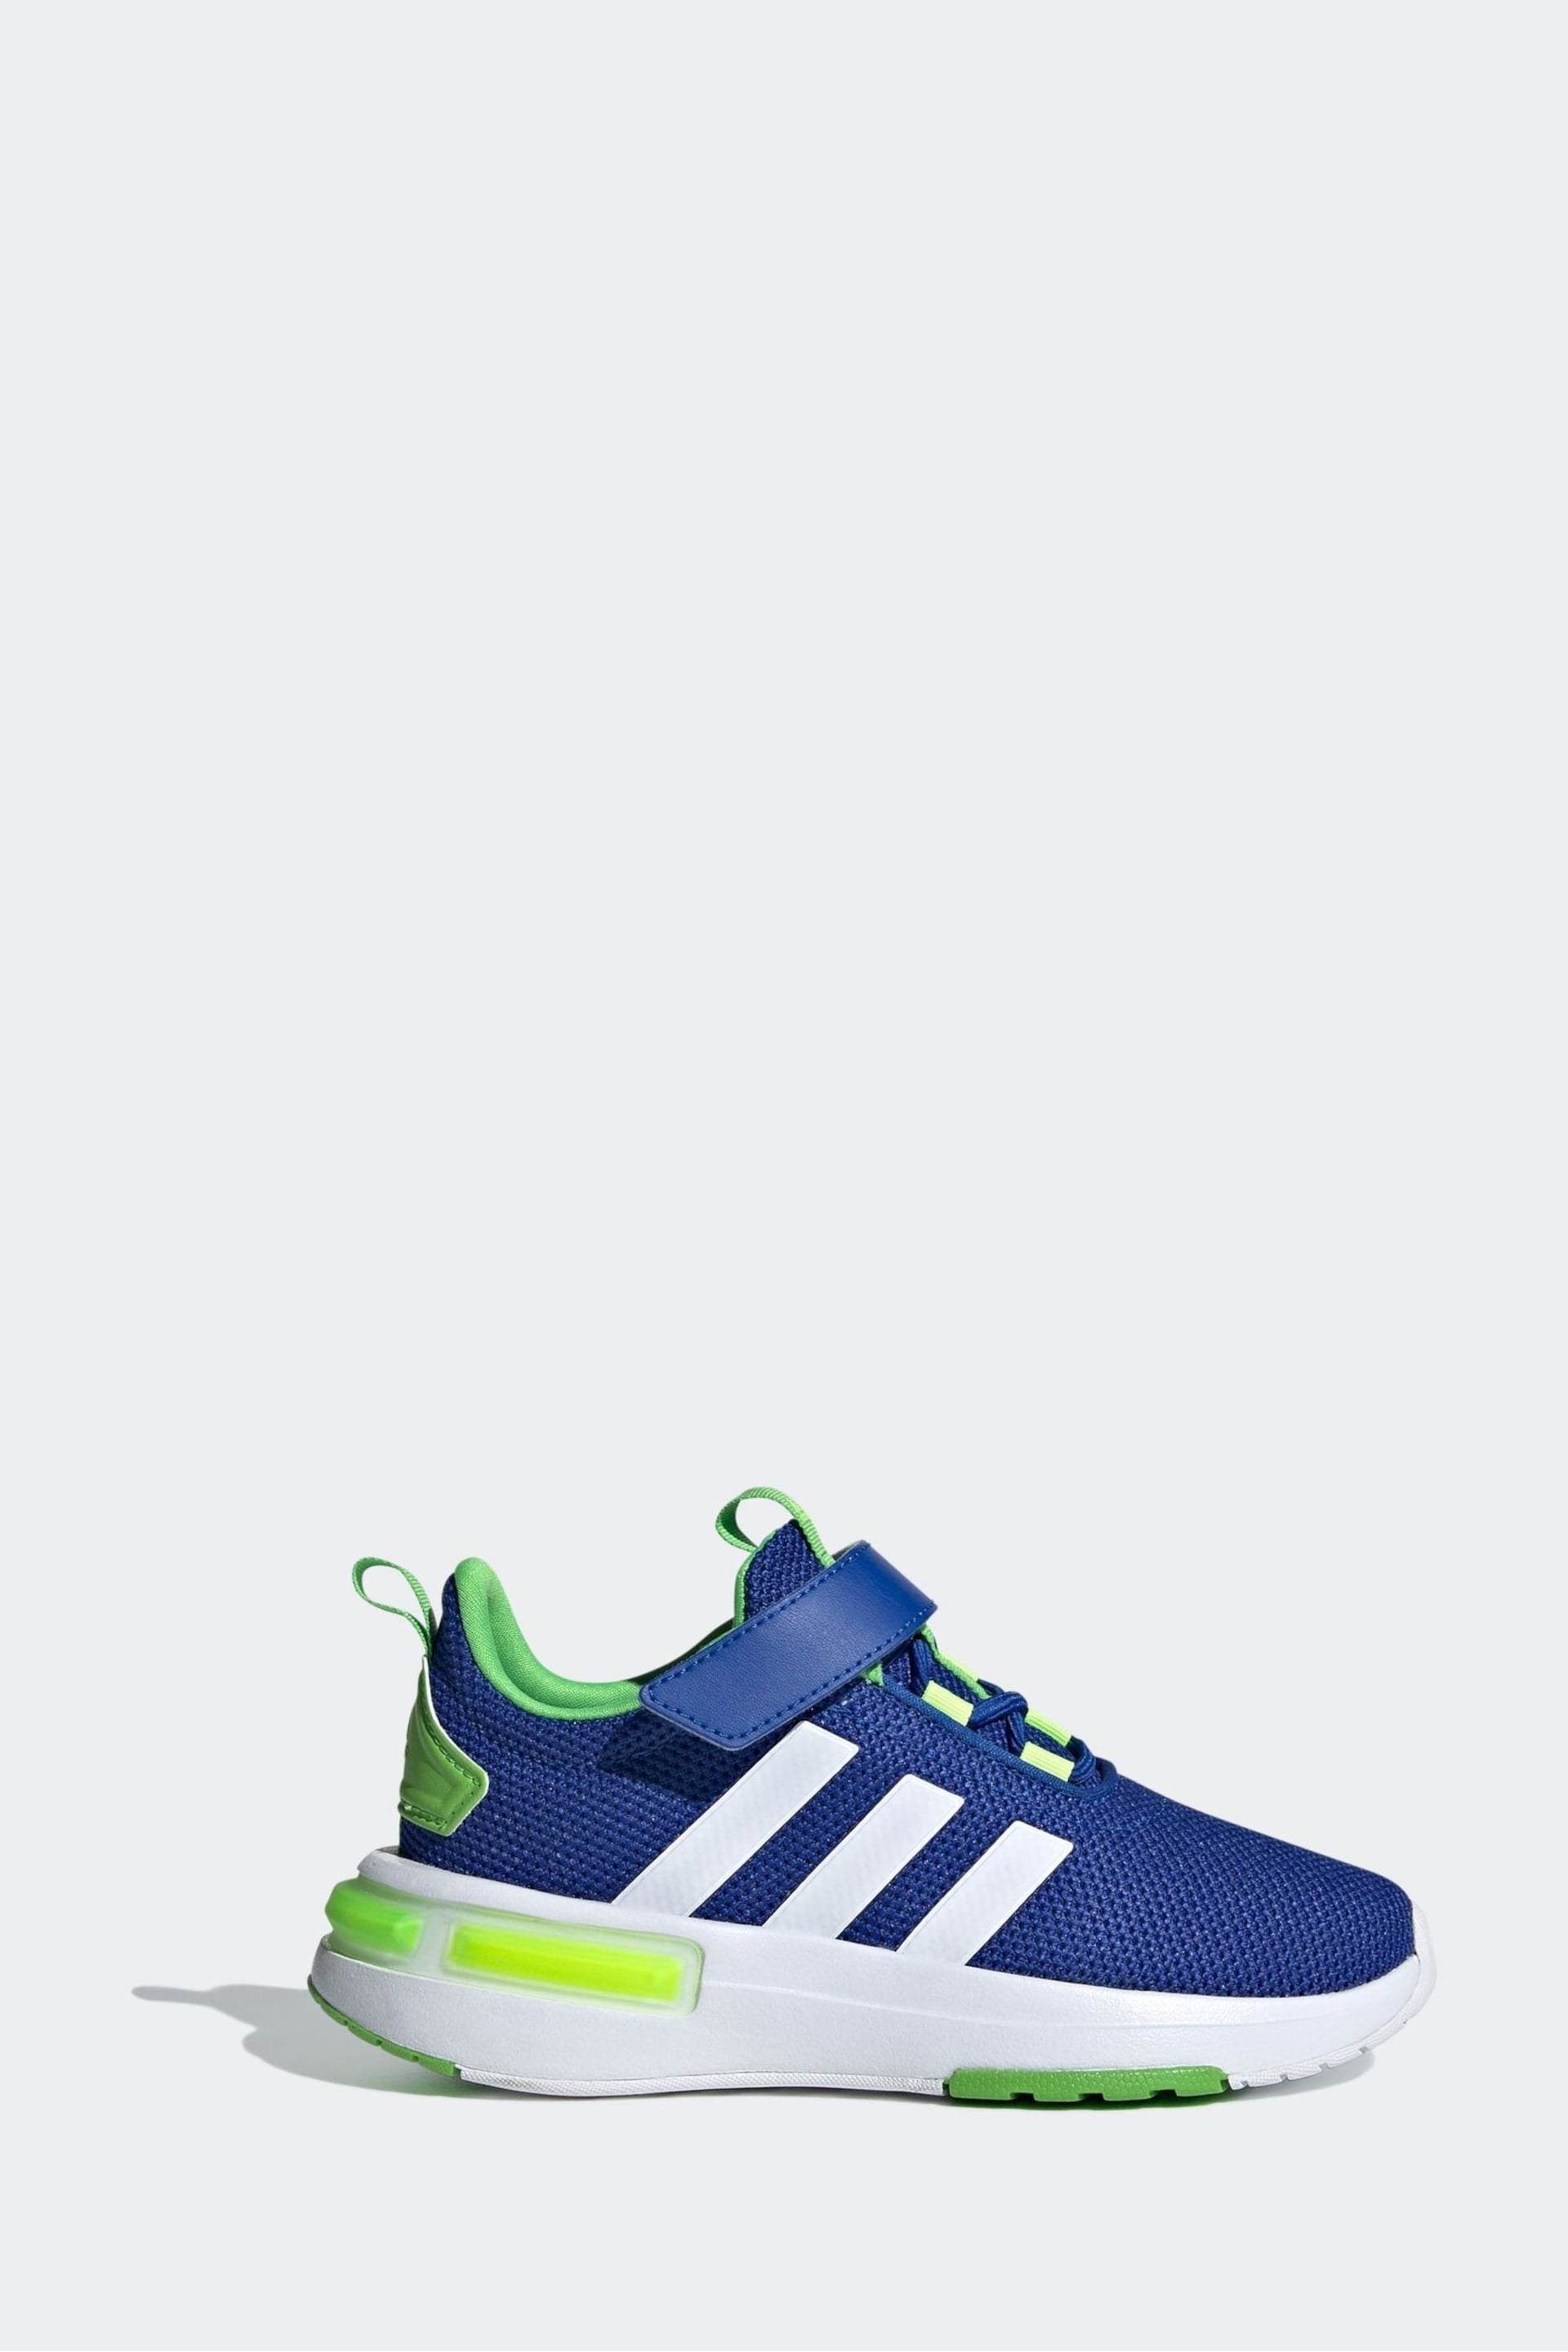 adidas Blue Kids Sportswear Racer TR23 Trainers - Image 1 of 8